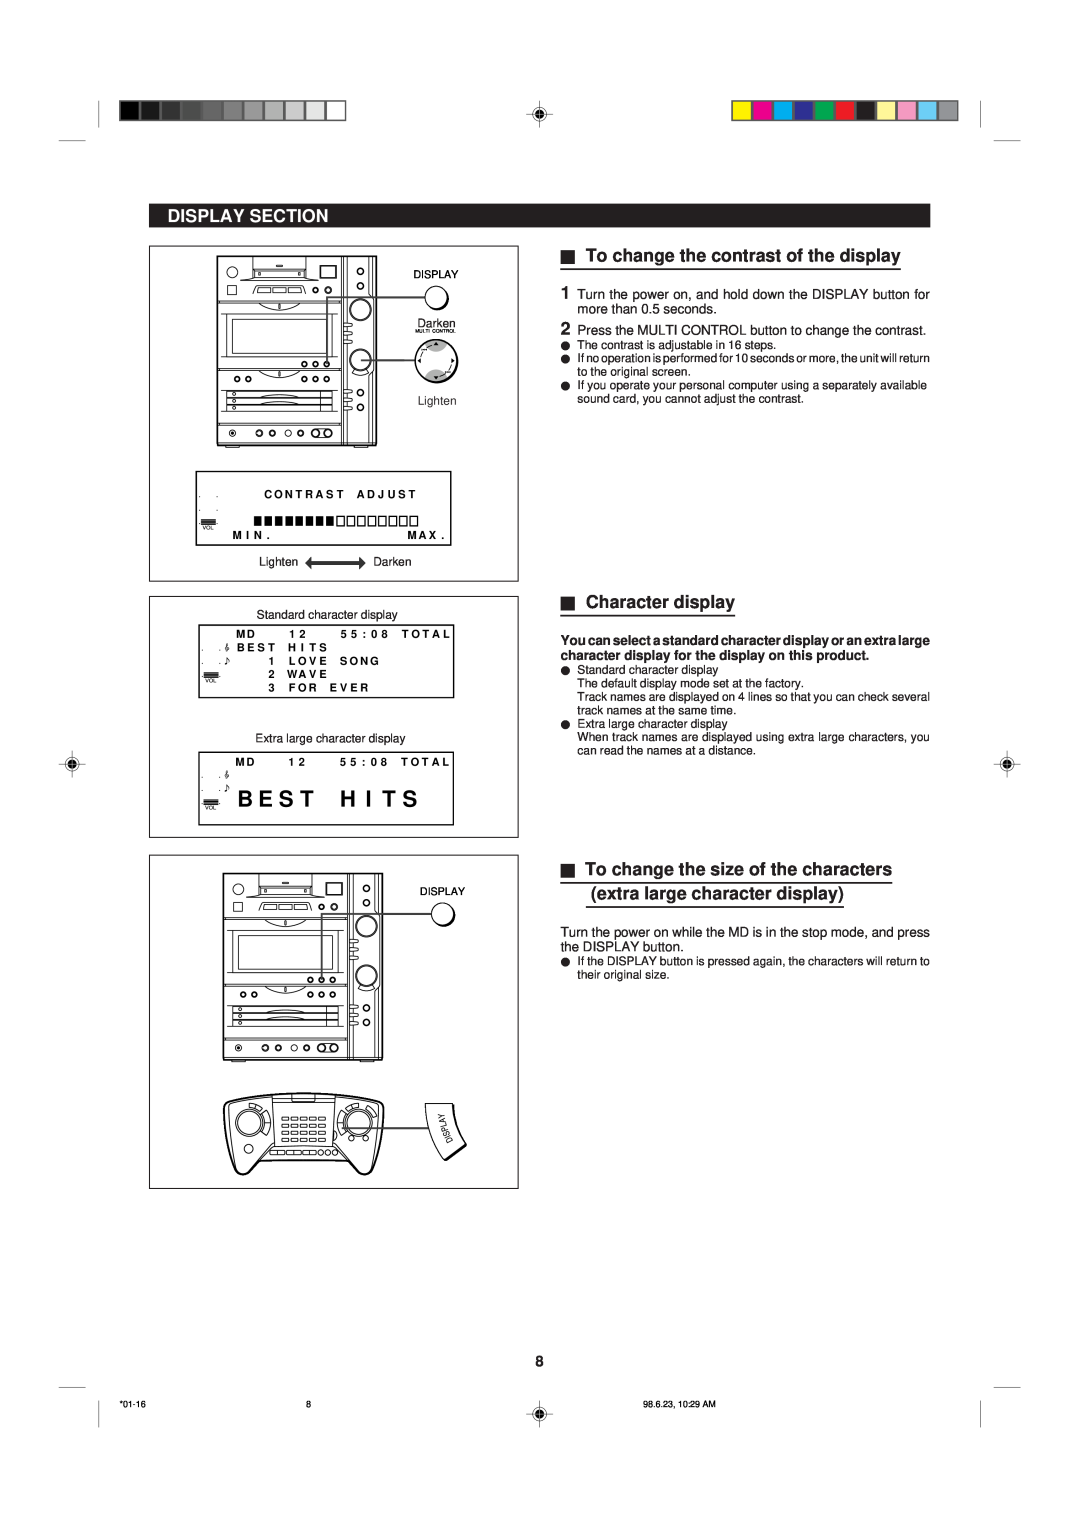 Sharp MD-X8 operation manual B E S T W H I T S, Display Section, HTo change the contrast of the display, HCharacter display 